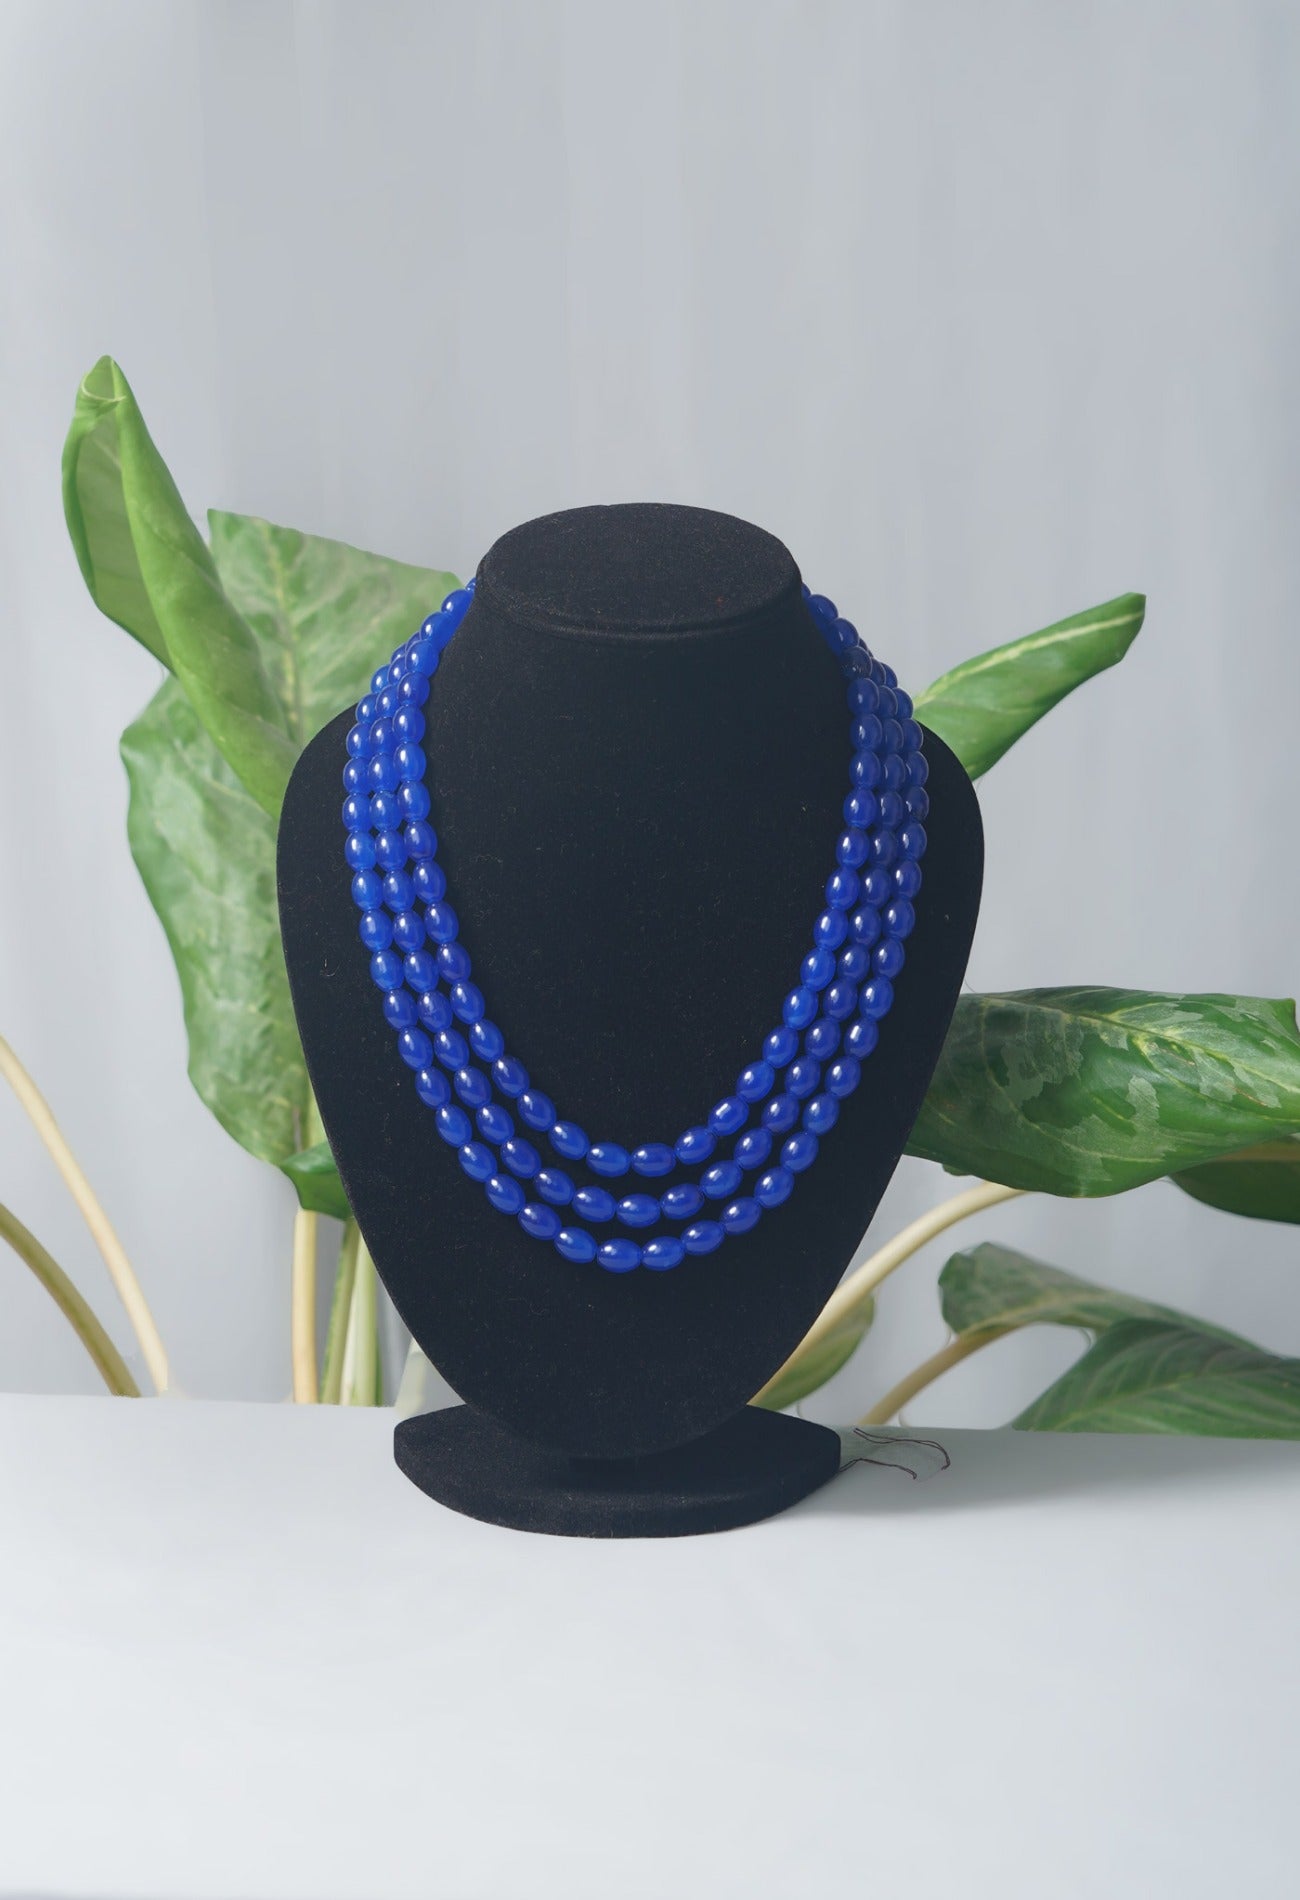 Online Shopping for Blue Amravati Oval Beads Necklace with Pendent with jewellery from Andhra pradesh at Unnatisilks.com India
